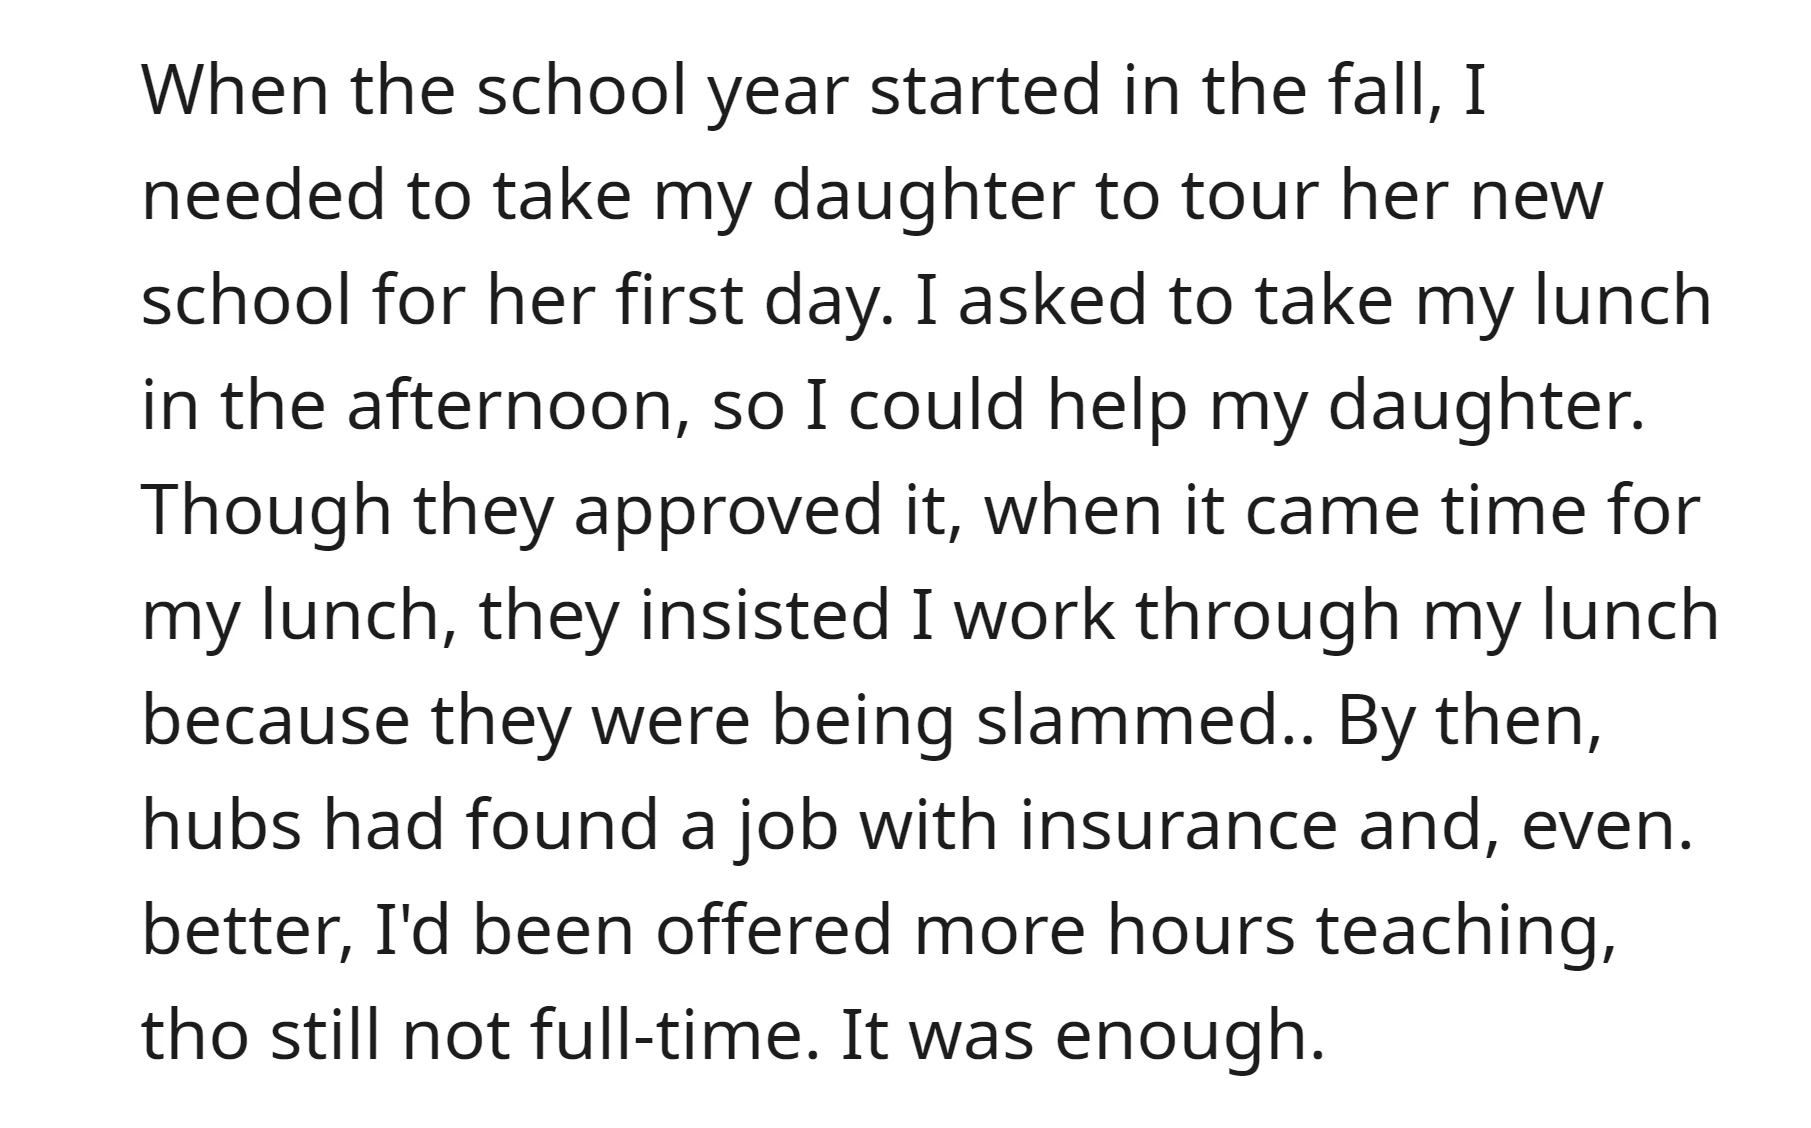 Her husband found a new job offering insurance, and the situation improved